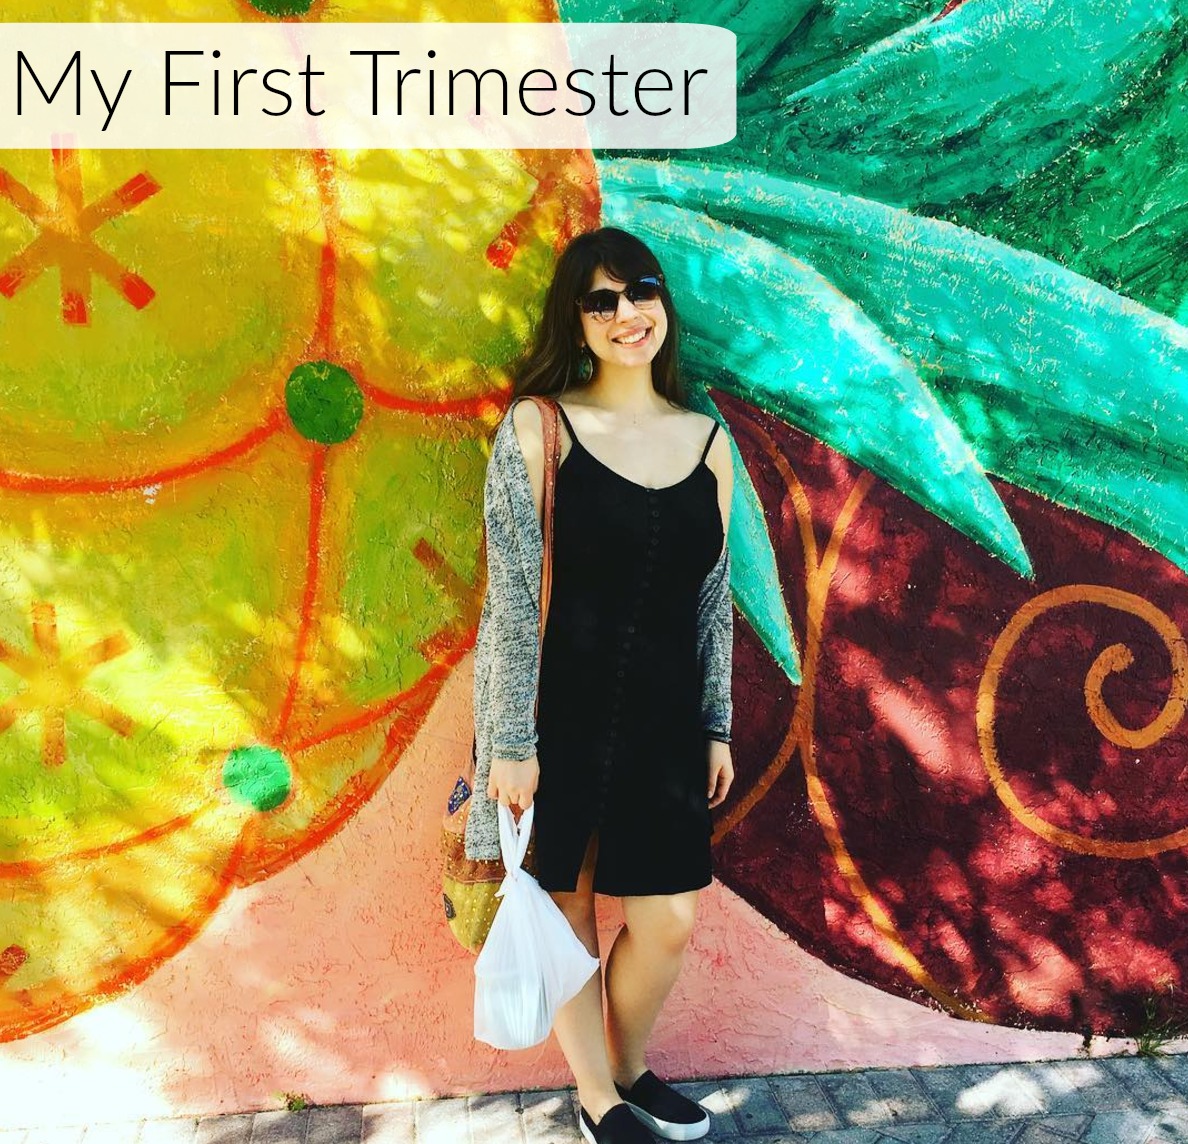 My First Trimester